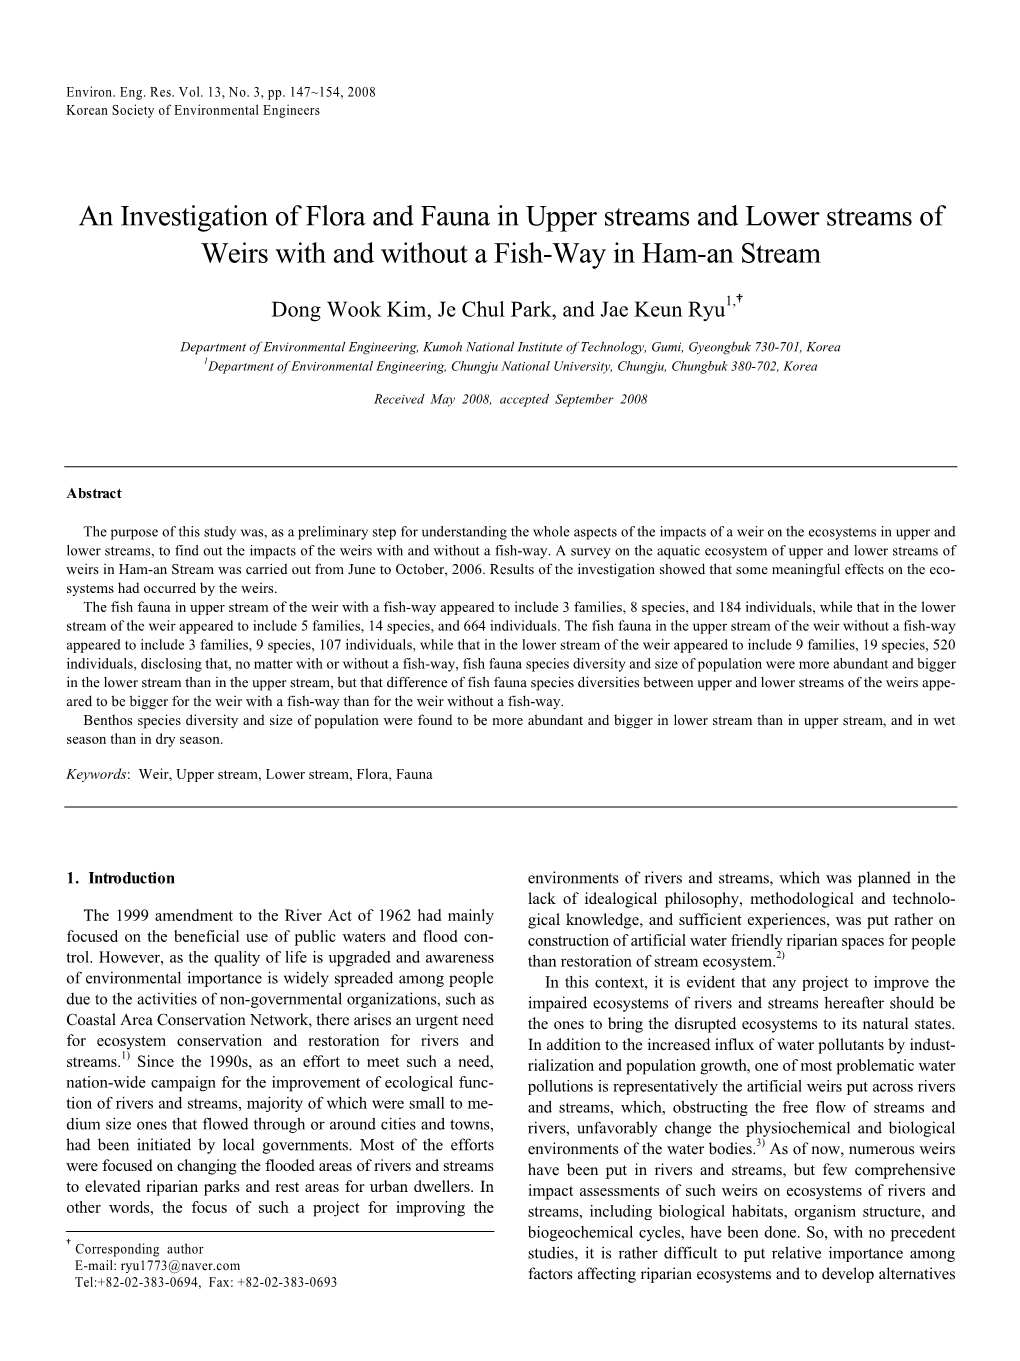 An Investigation of Flora and Fauna in Upper Streams and Lower Streams of Weirs with and Without a Fish-Way in Ham-An Stream